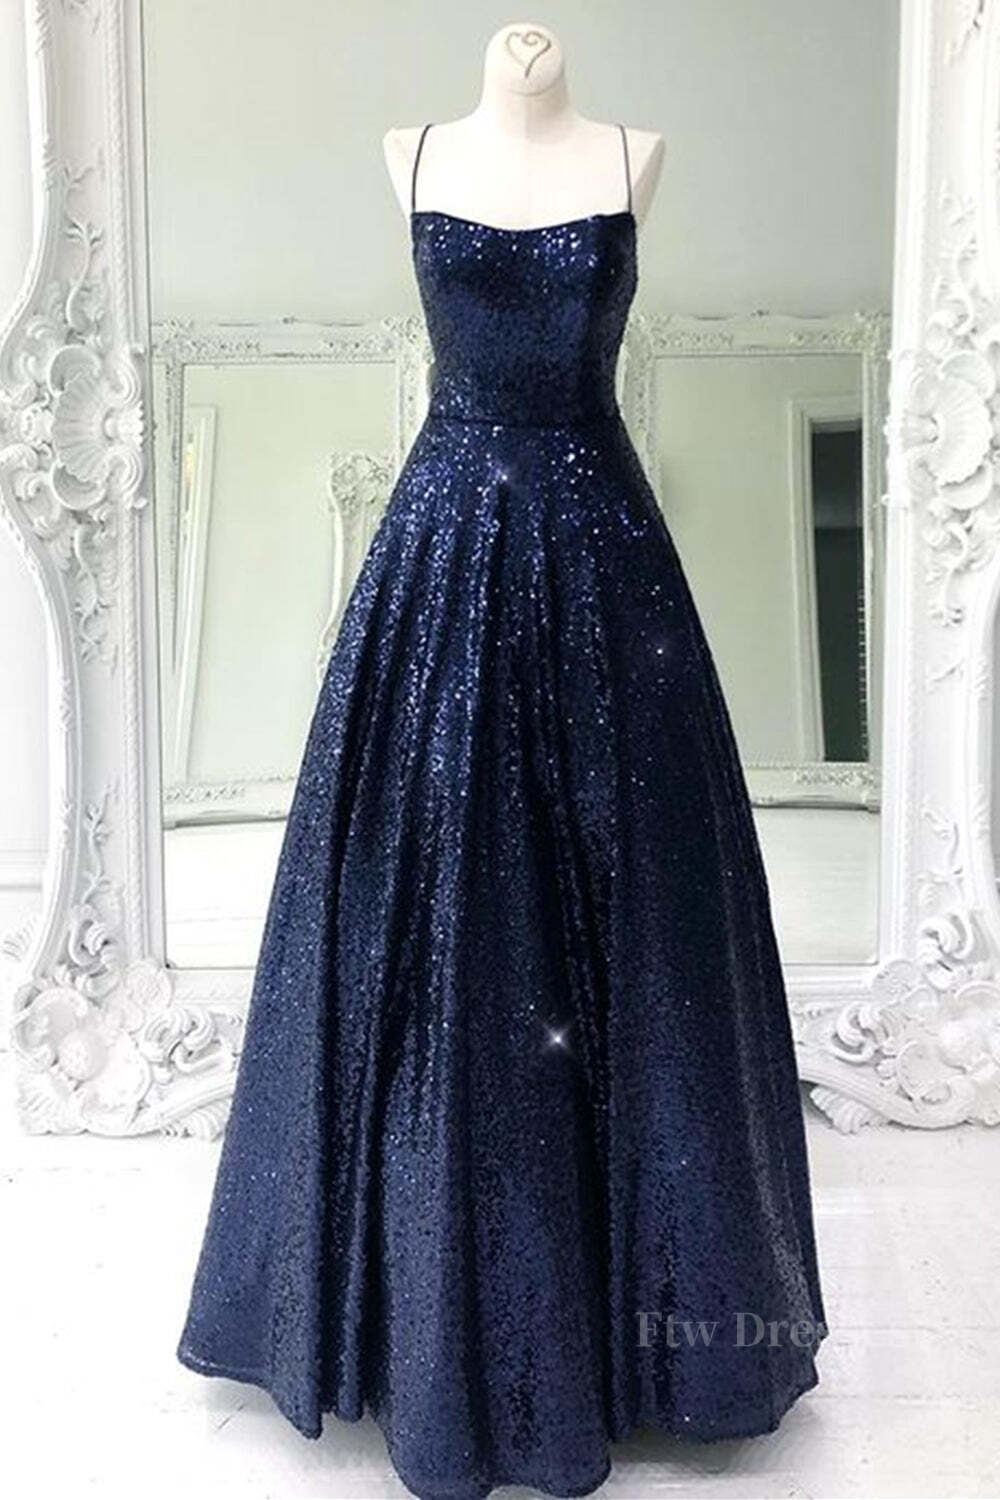 Sparkly Backless Navy Blue Long Prom Dresses, Open Back Long Navy Blue Formal Evening Dresses